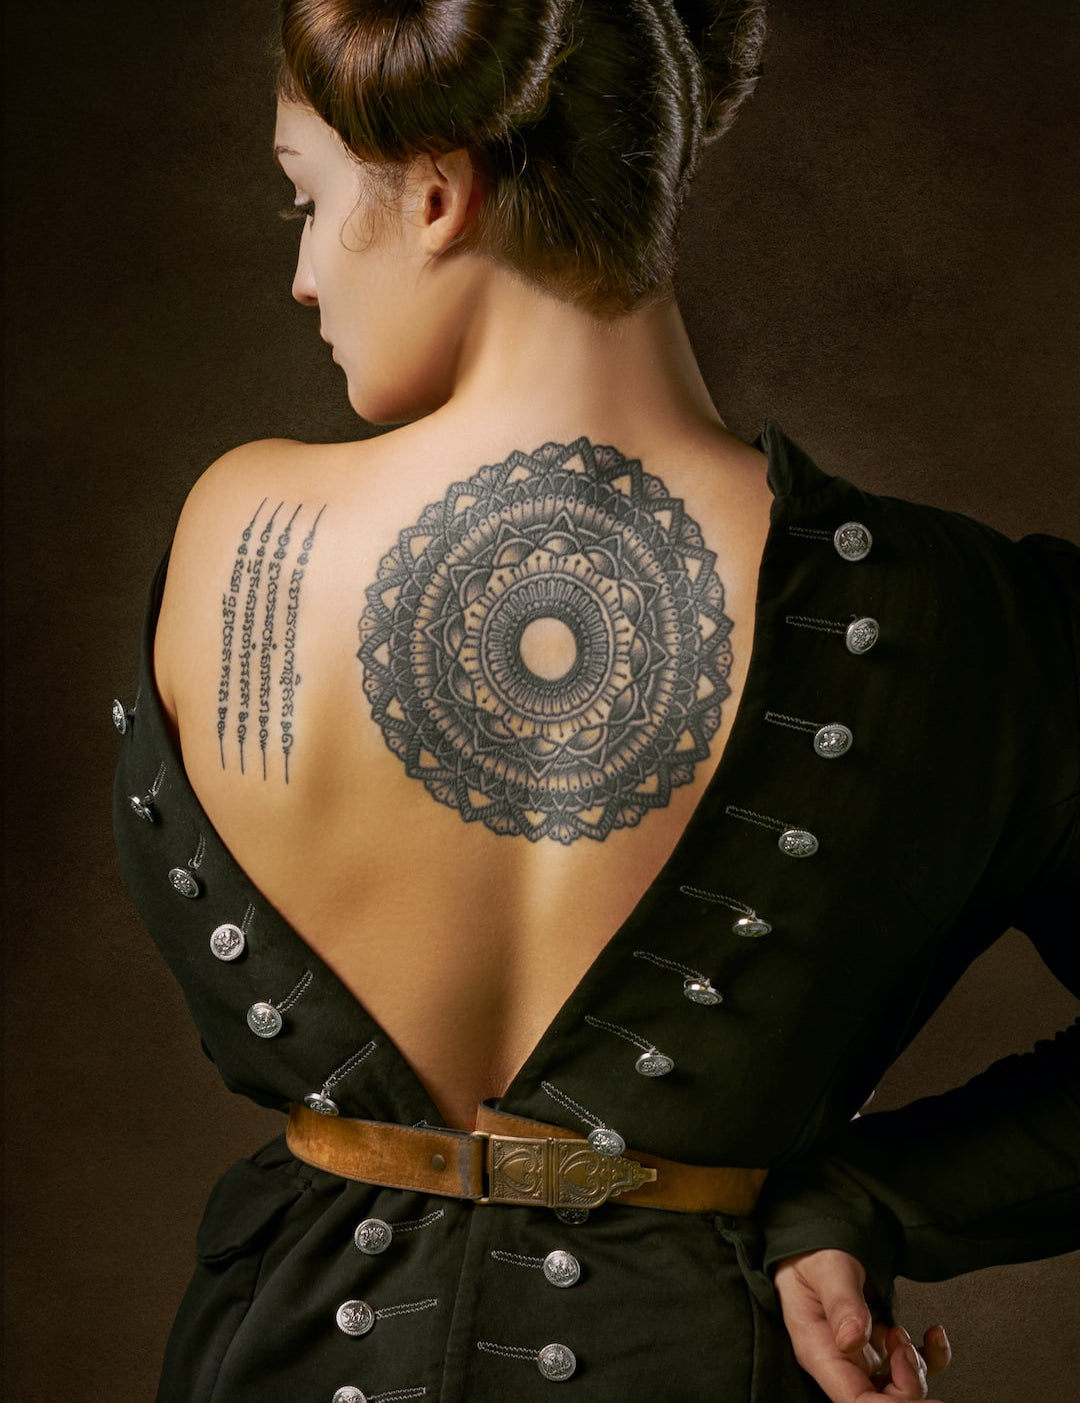 The Cultural Significance of Tattoos Around the World